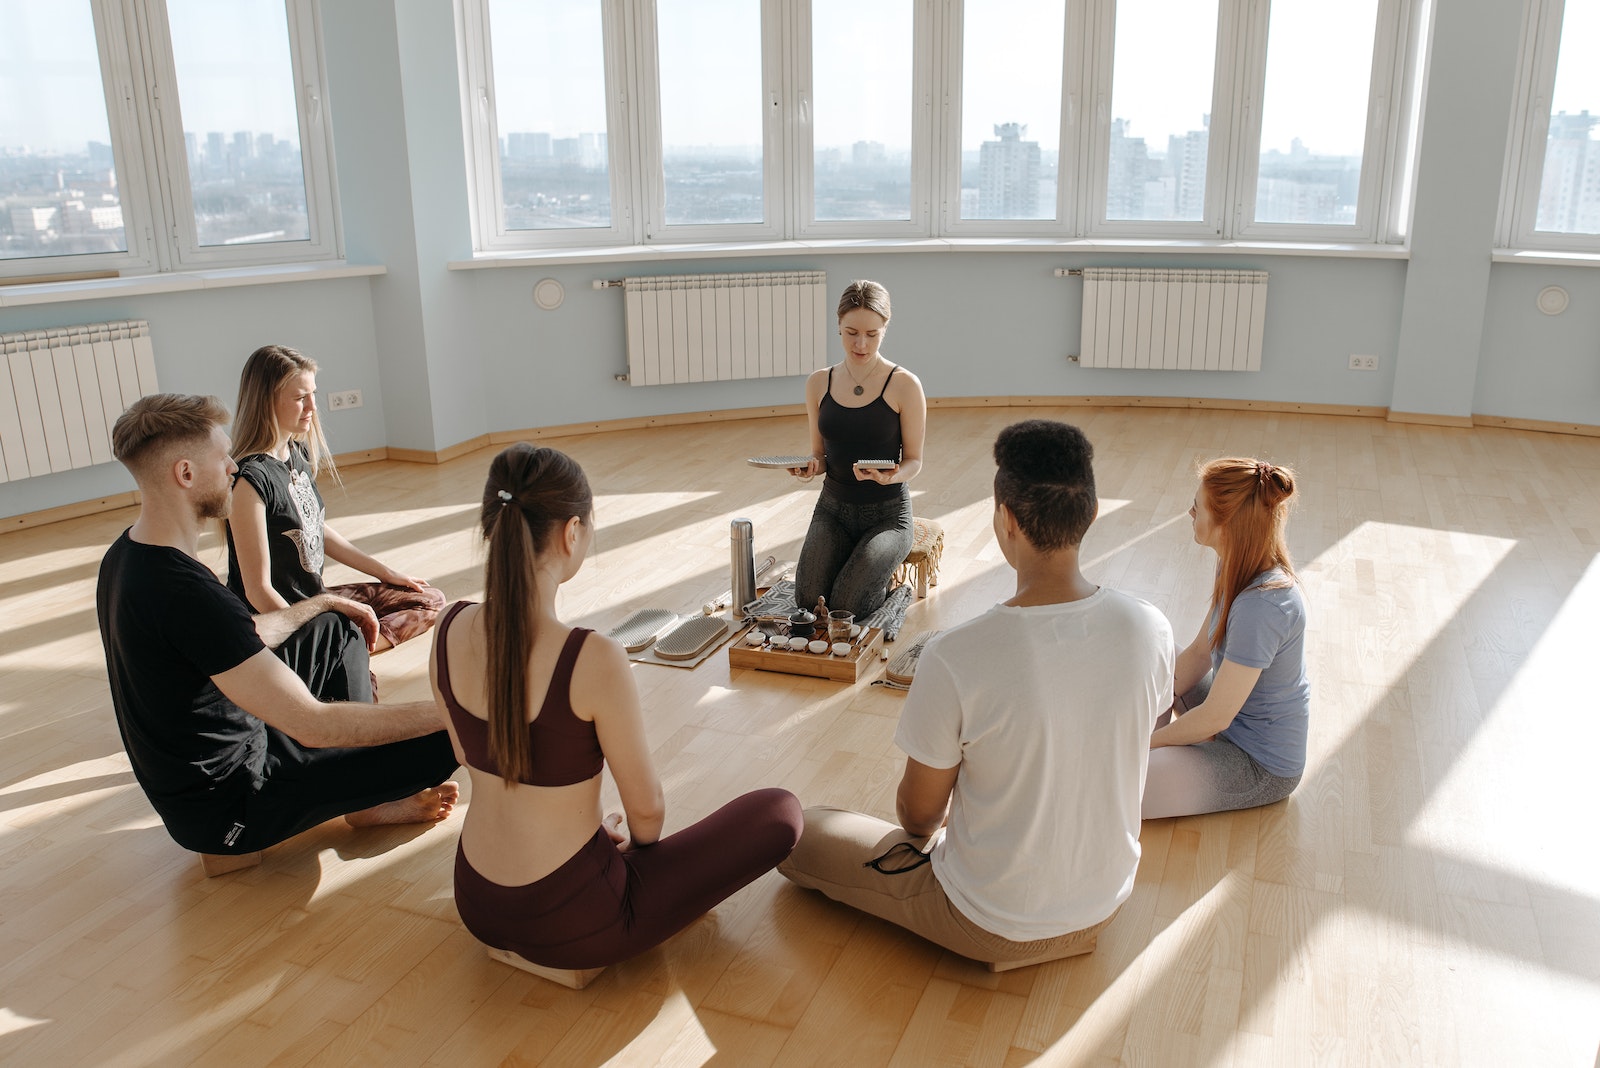 Family-Based Weight Loss yoga session